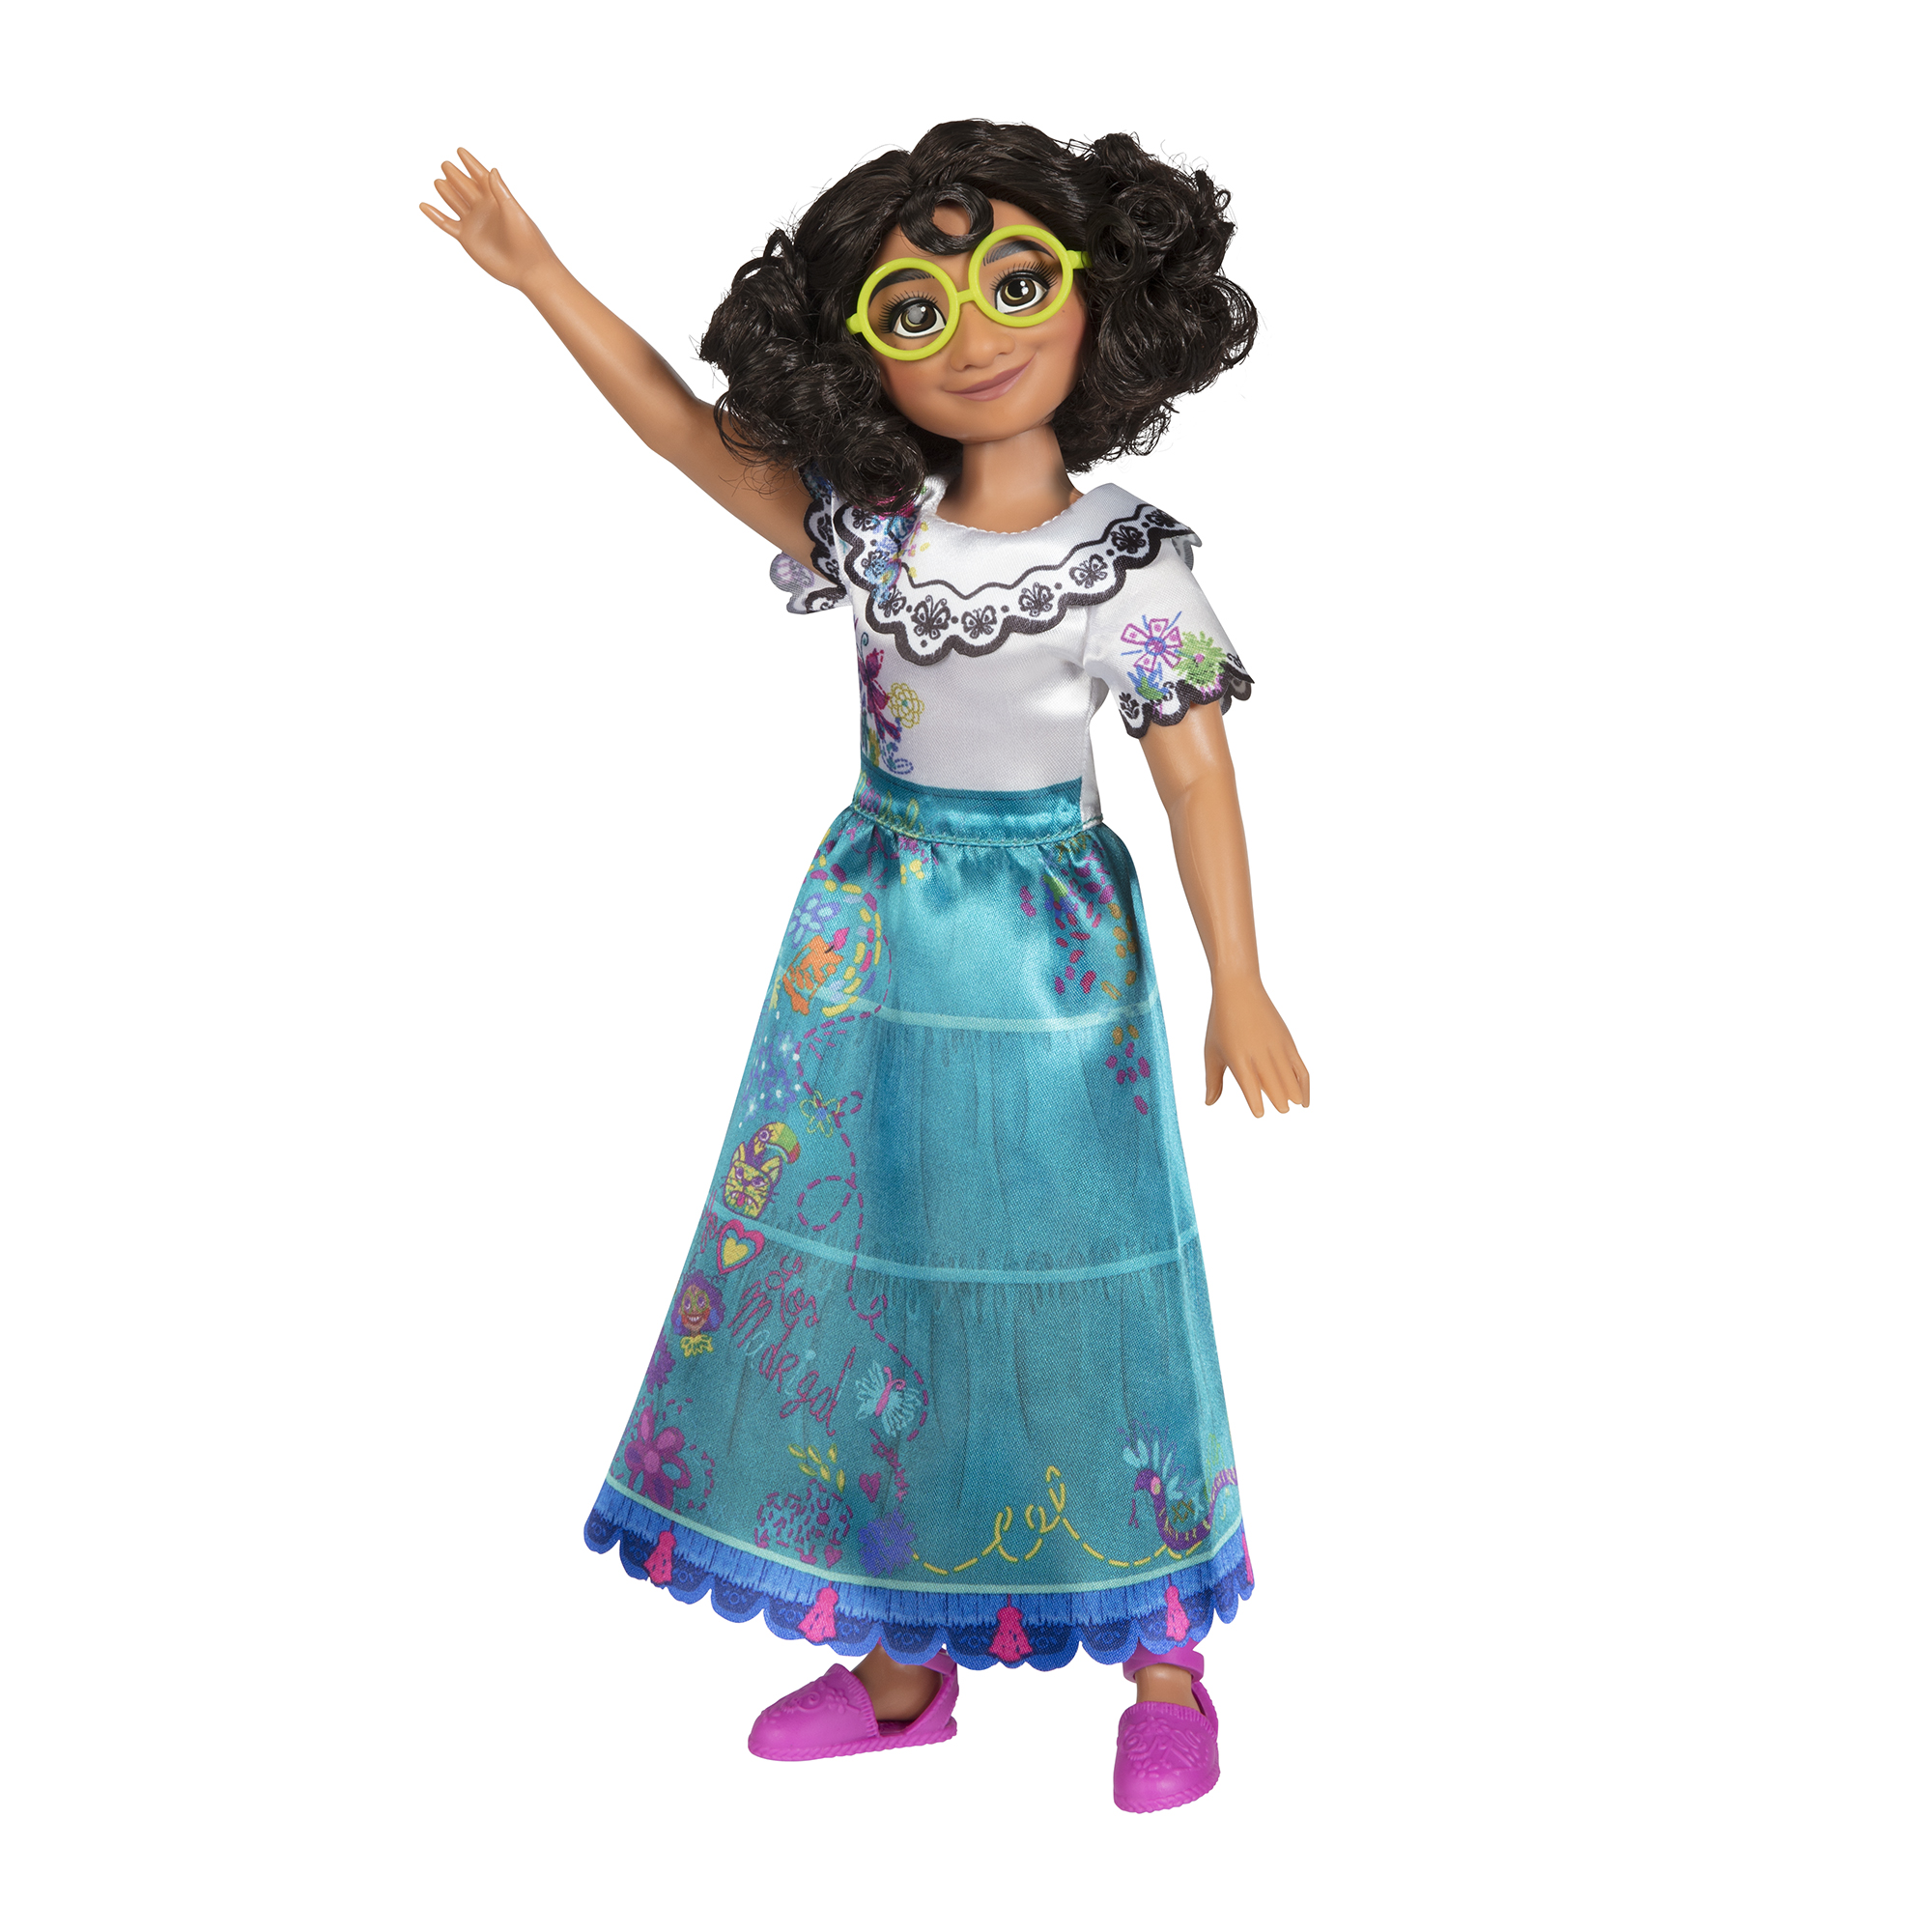 Disney Encanto Mirabel 11 inch Fashion Doll Includes Dress, Shoes and Hair Clip